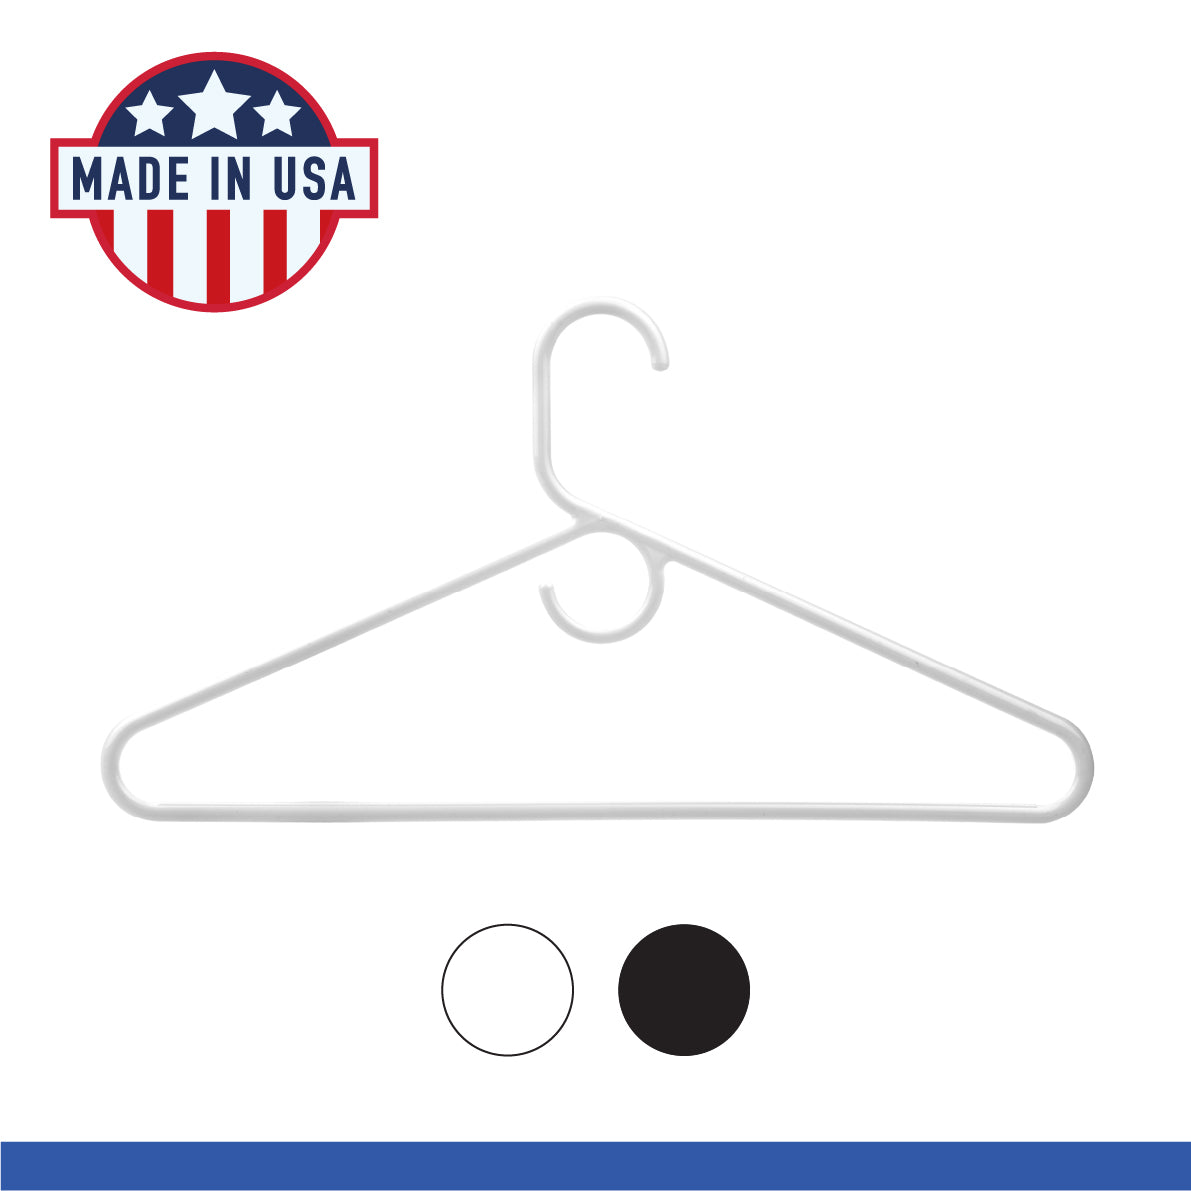 Neaties American Made Steel Blue Super Heavy Duty Plastic Hangers, Plastic  Clothes Hangers Ideal for Everyday